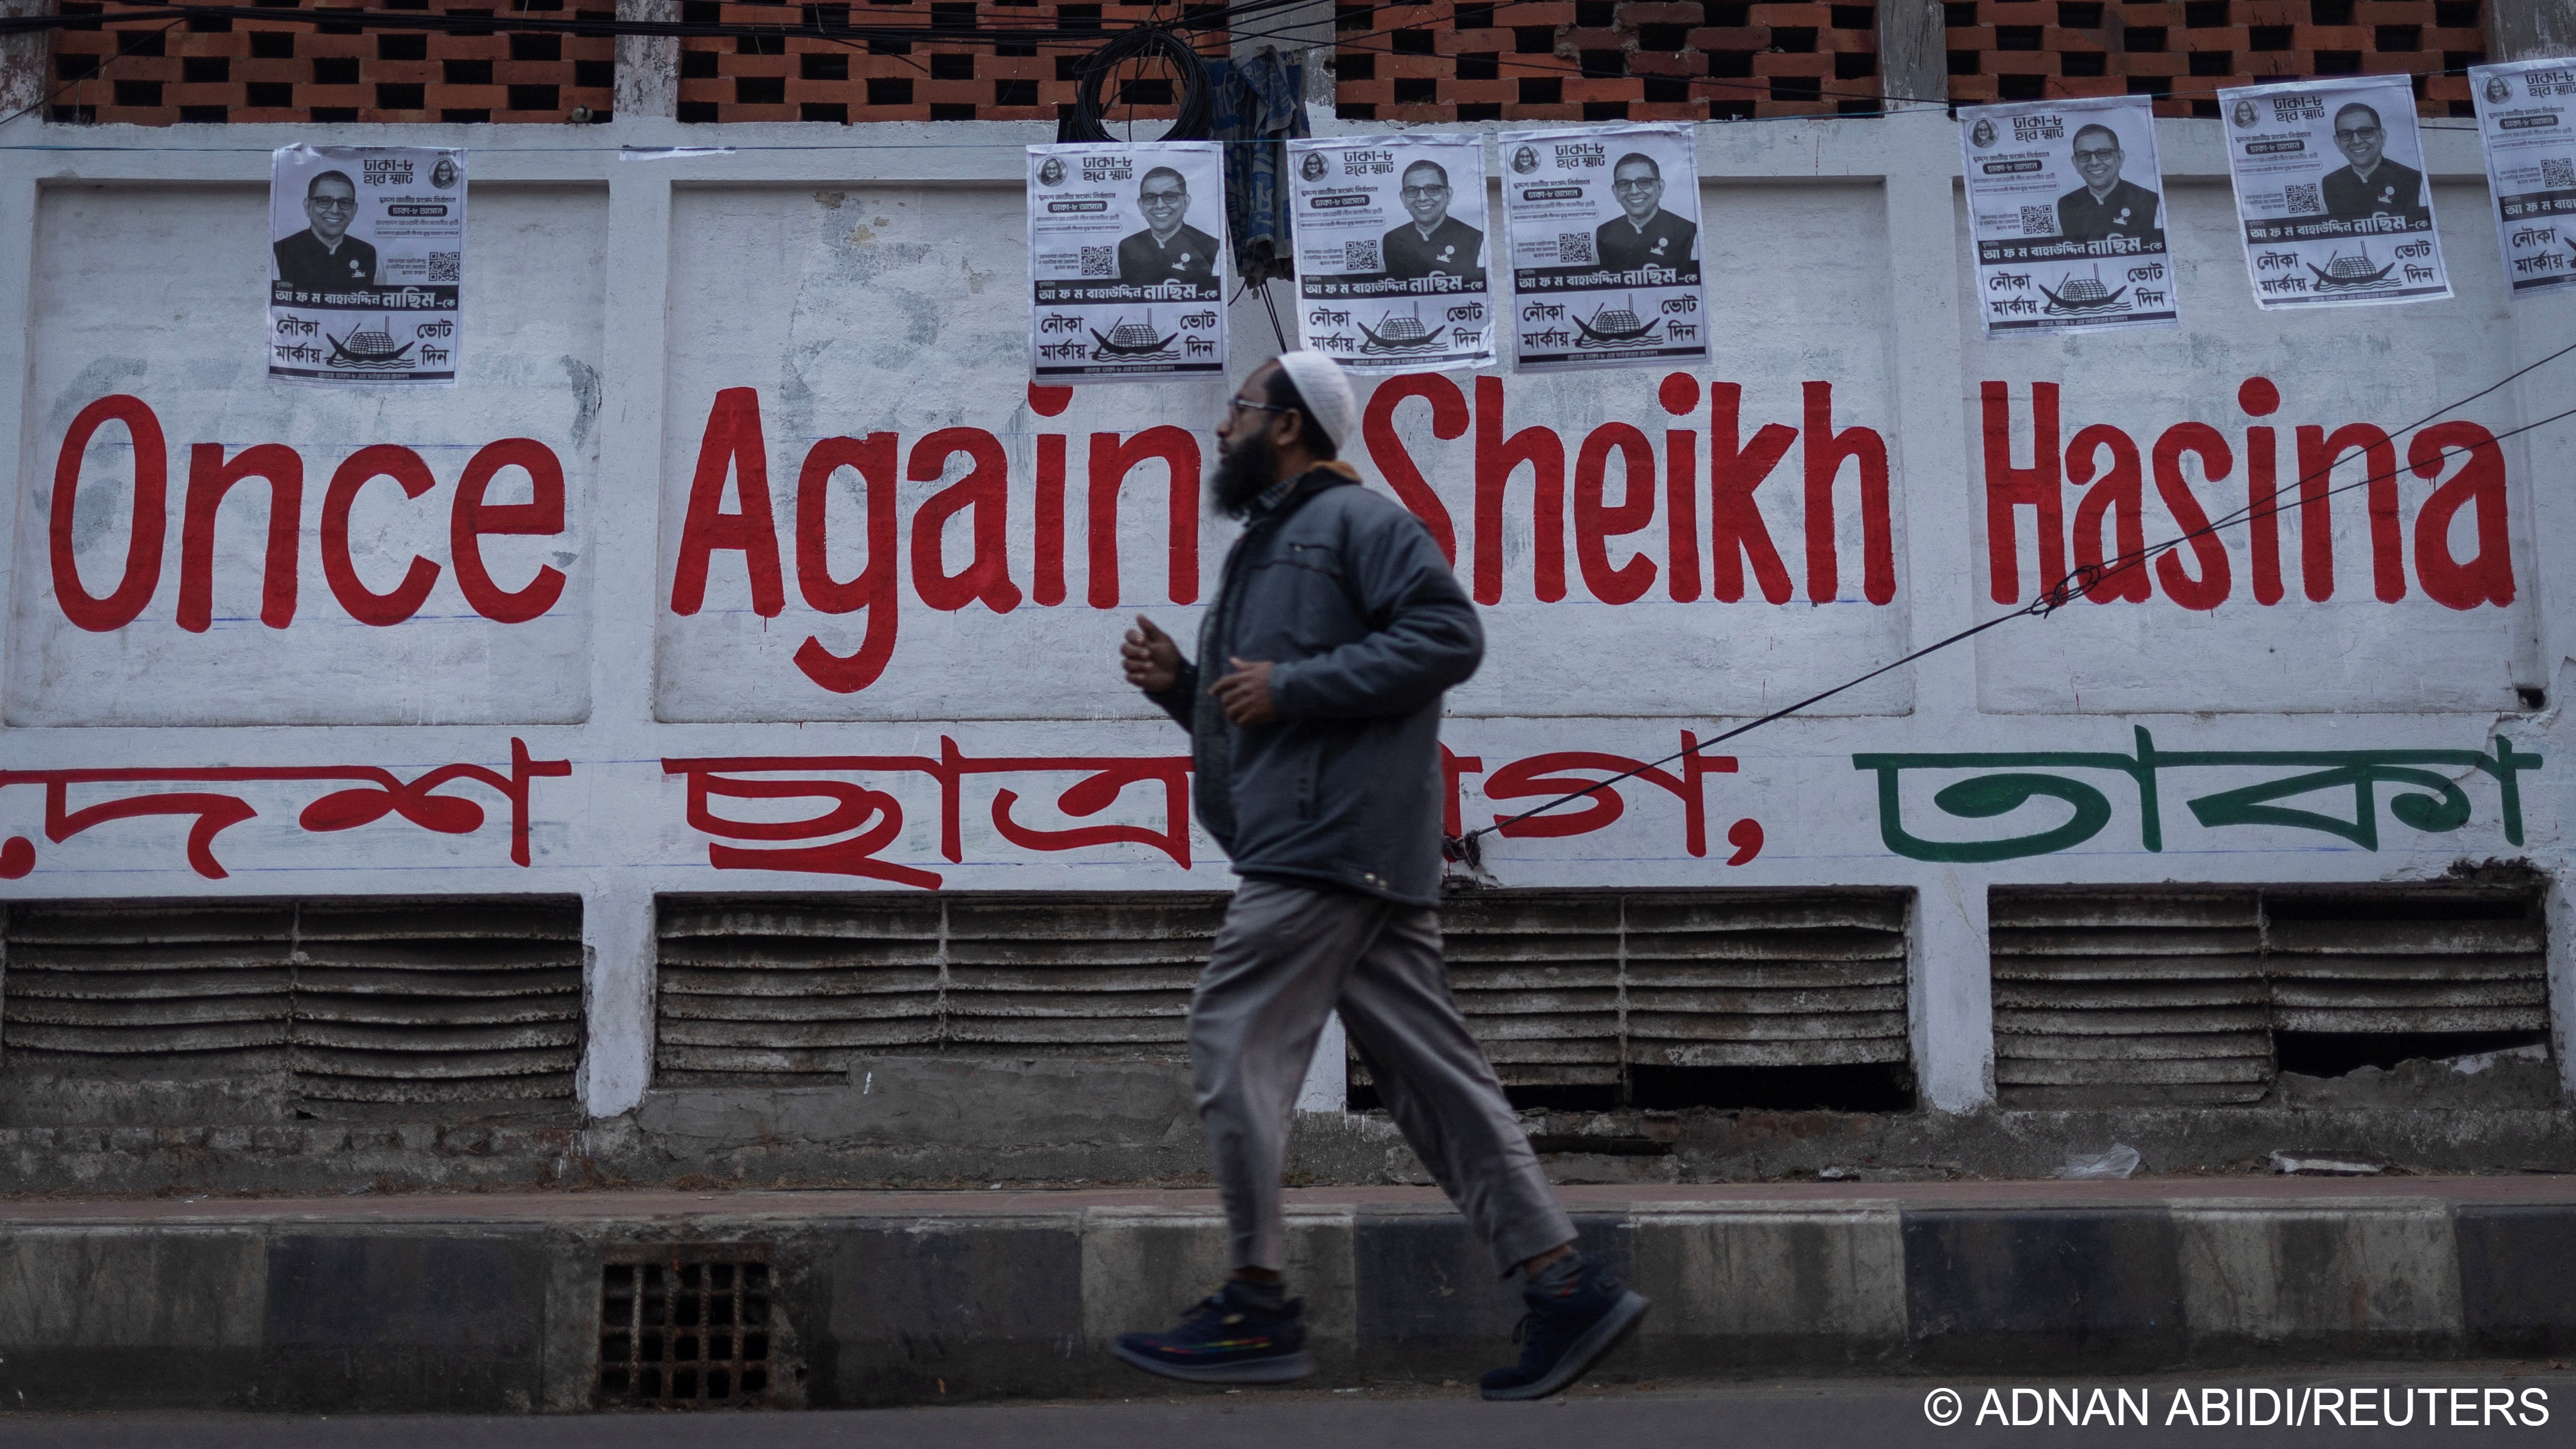 A man jogs past election campaign posters for the Awami League and the slogan 'once again Sheikh Hasina' on a street ahead of the general election on 7 January, Dhaka, Bangladesh, 4 January 2024